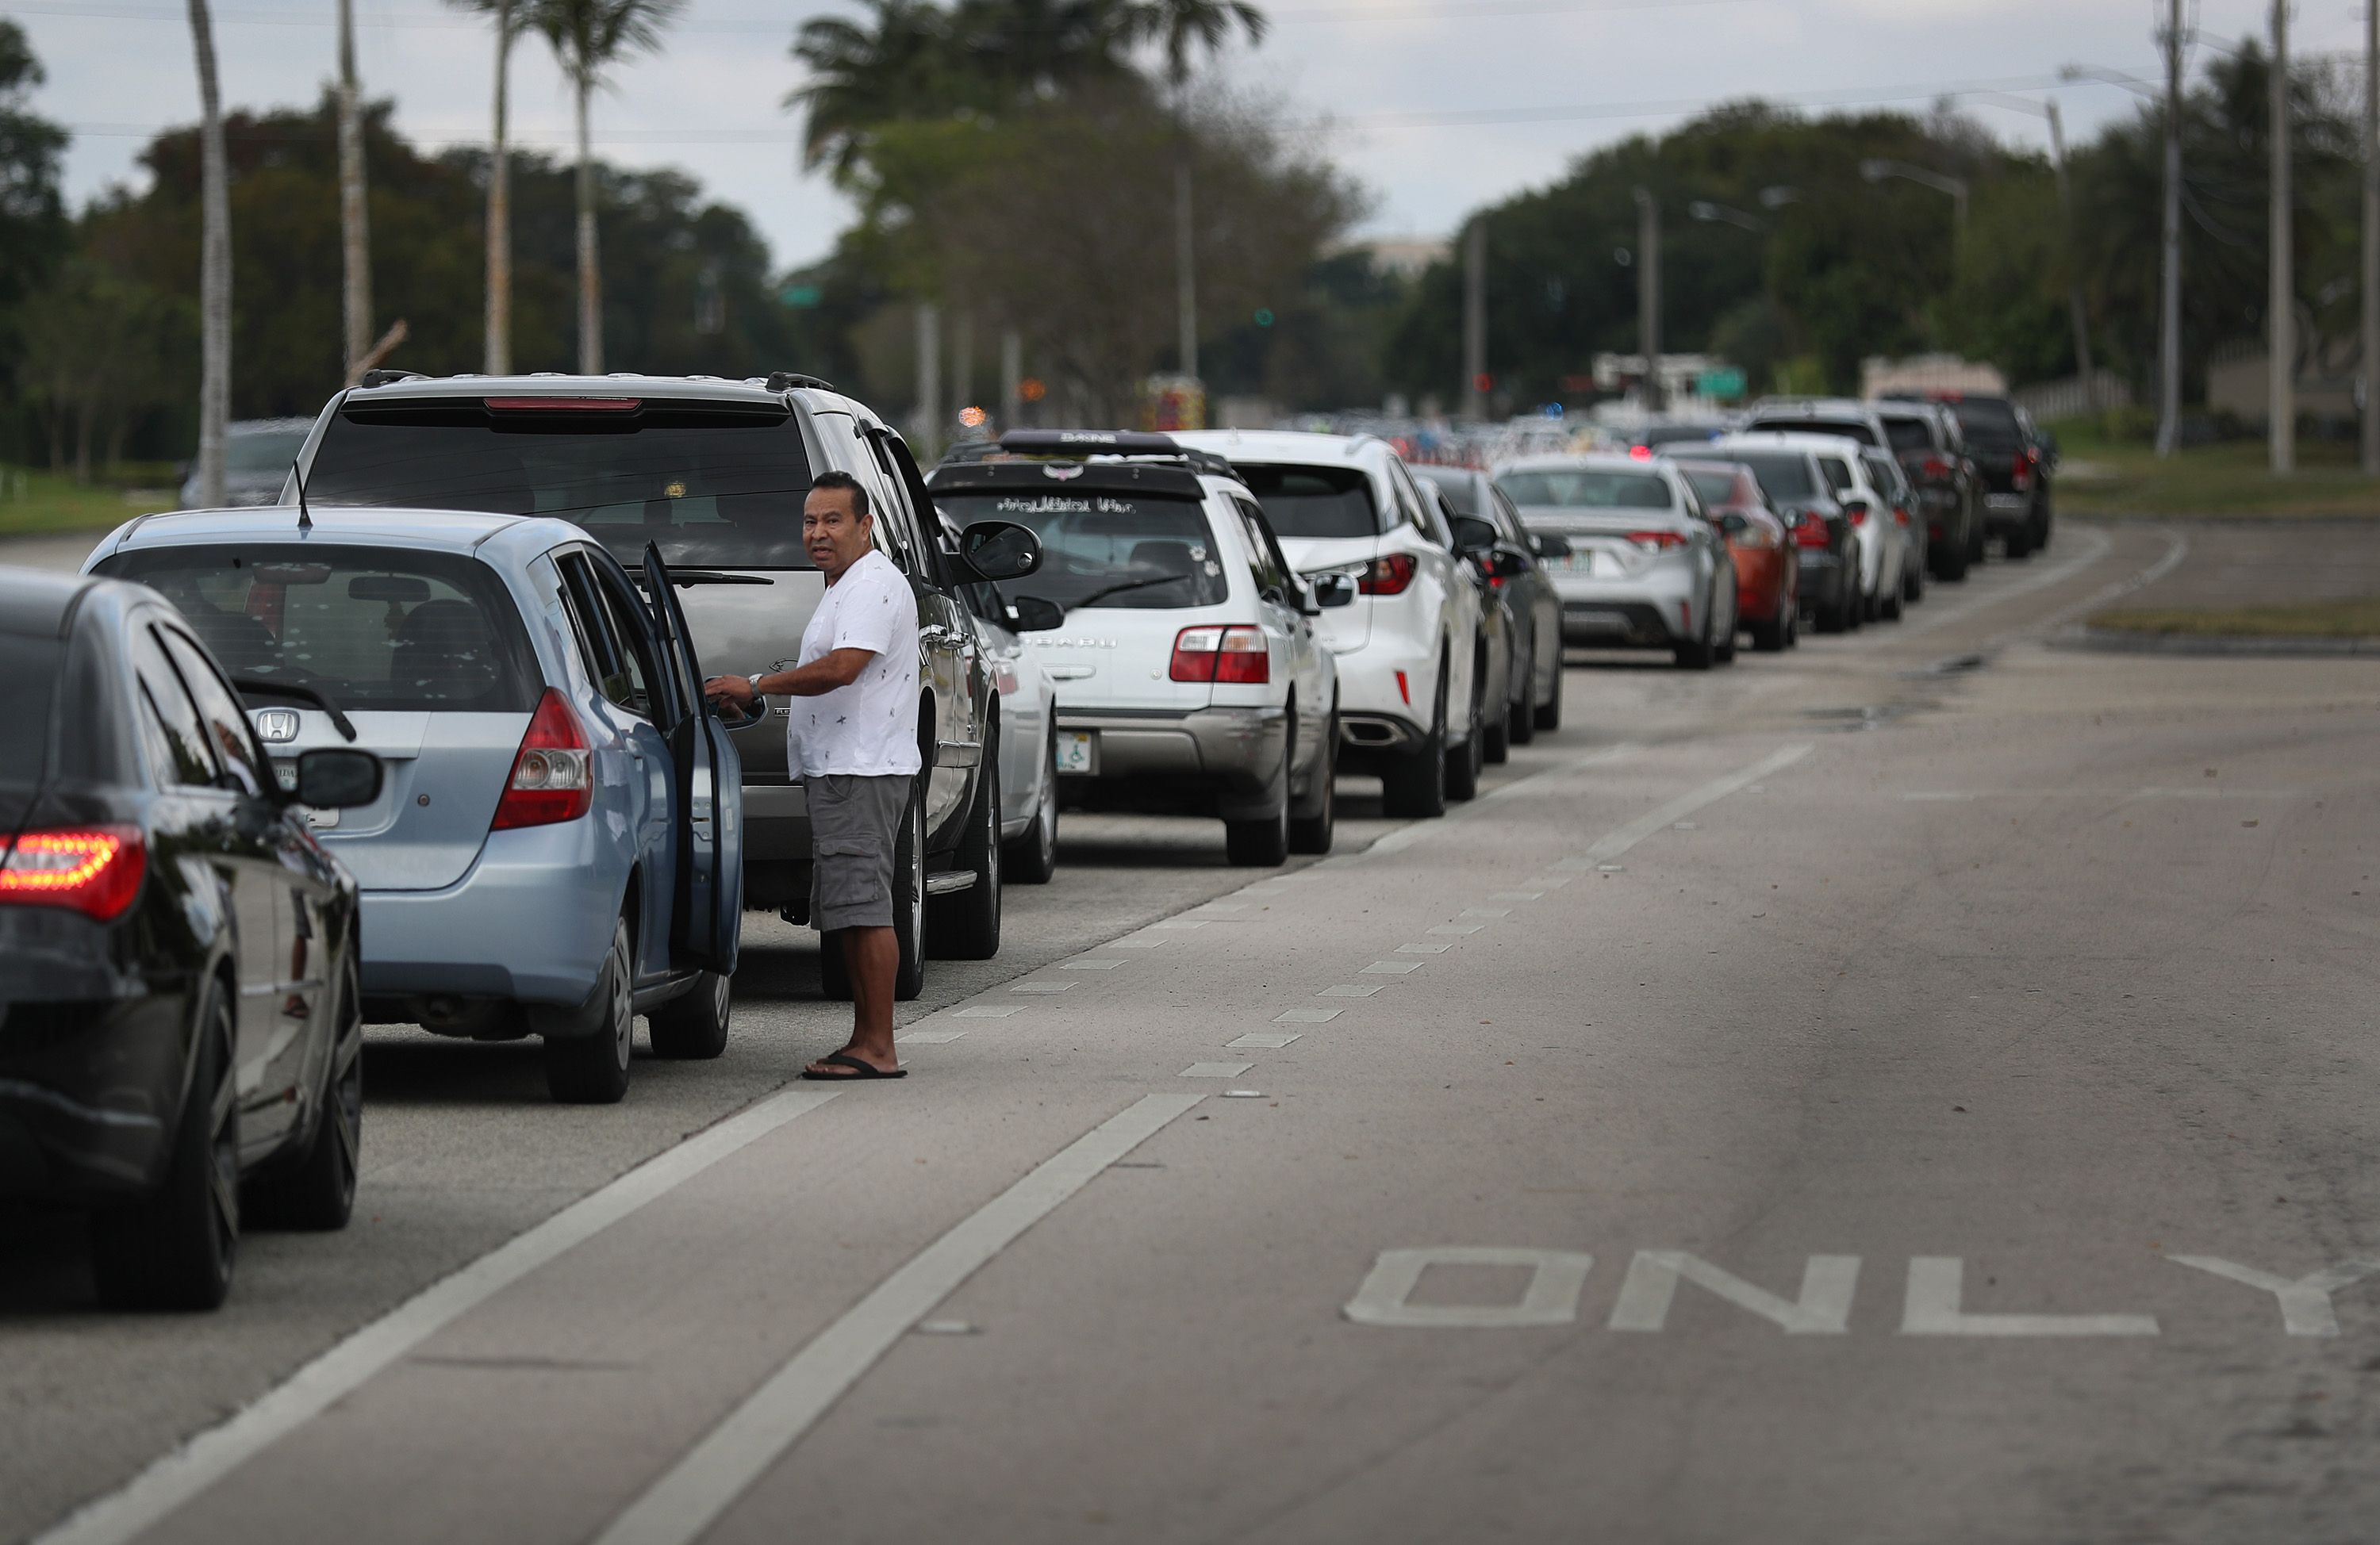 Jose Martinez waits in line next to his car to receive groceries provided by the food bank Feeding South Florida and distributed by the City of Sunrise on April 06